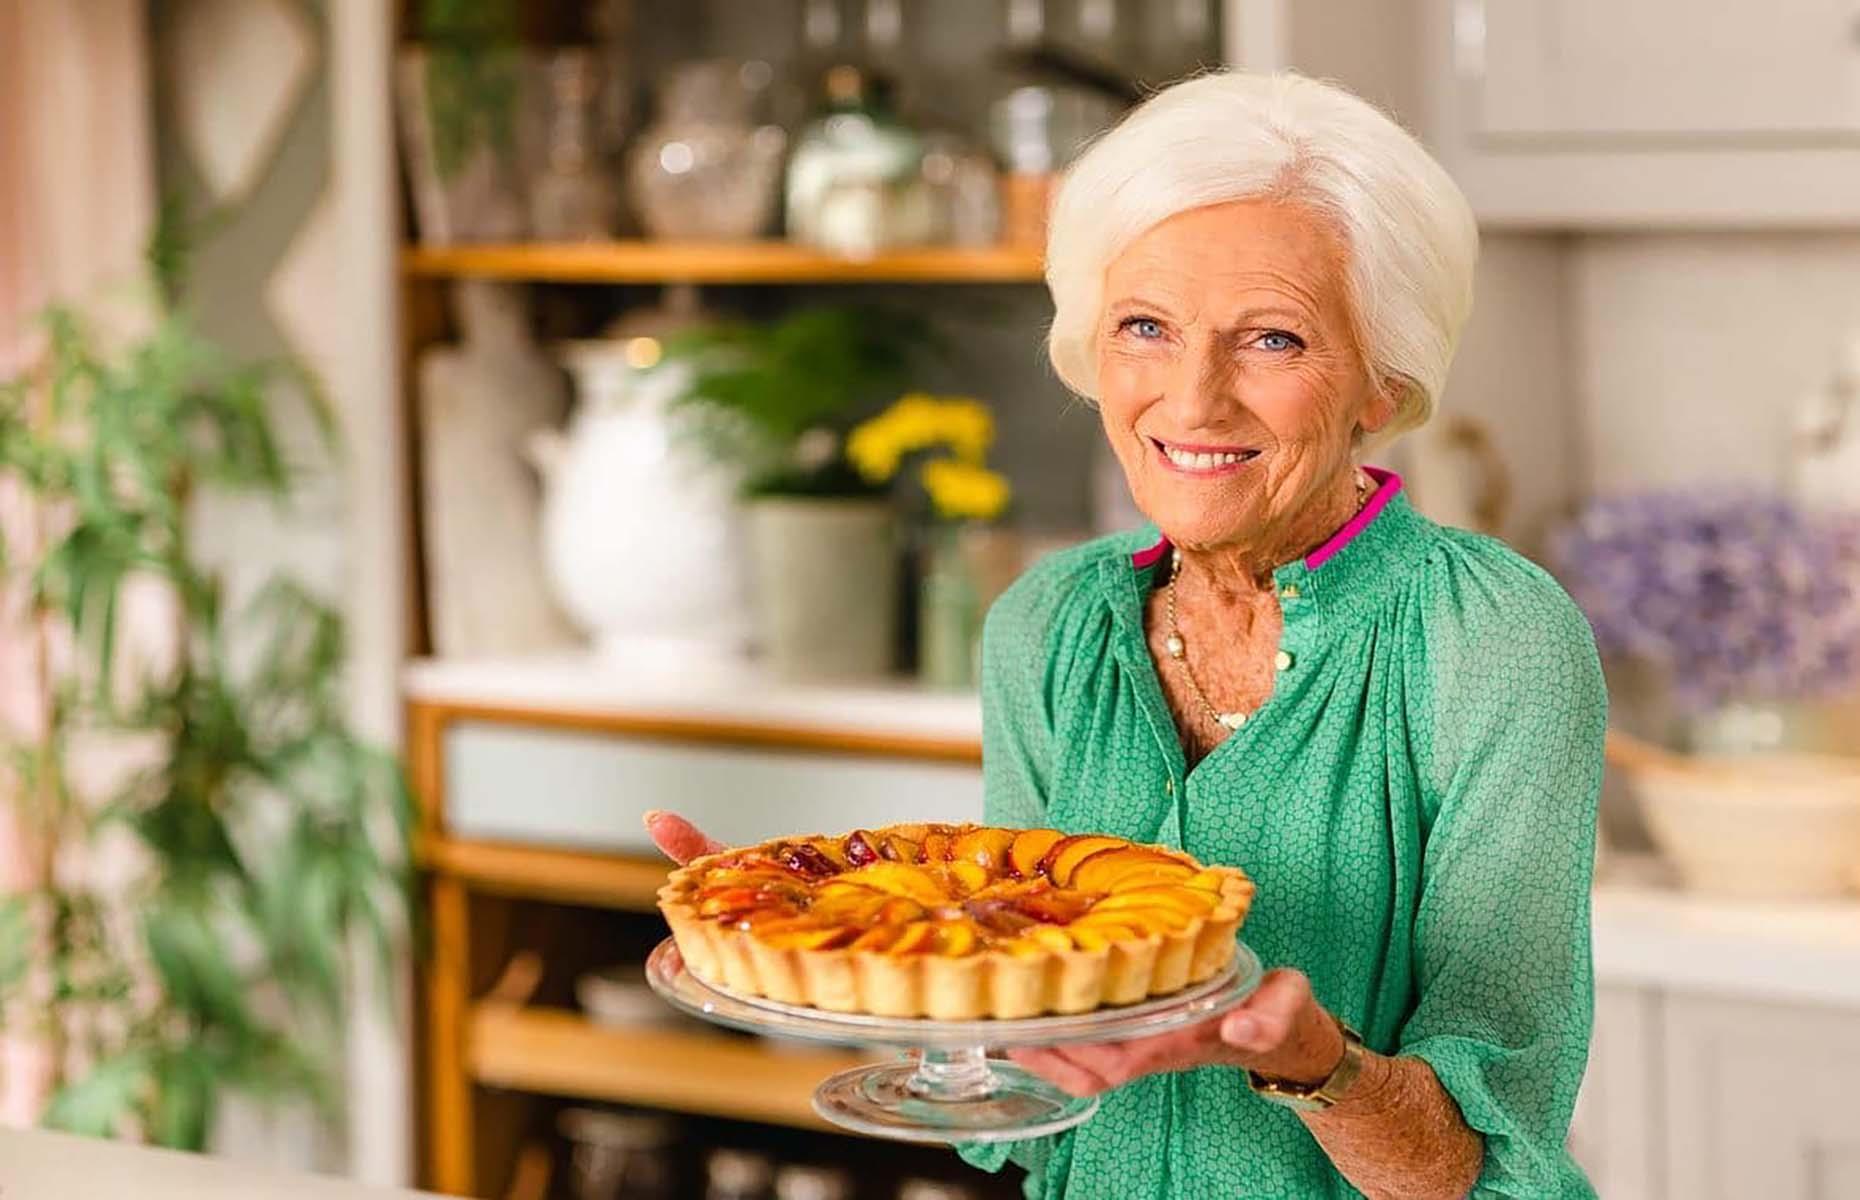 Bake like Britain's Mary Berry with 27 mouthwatering recipes